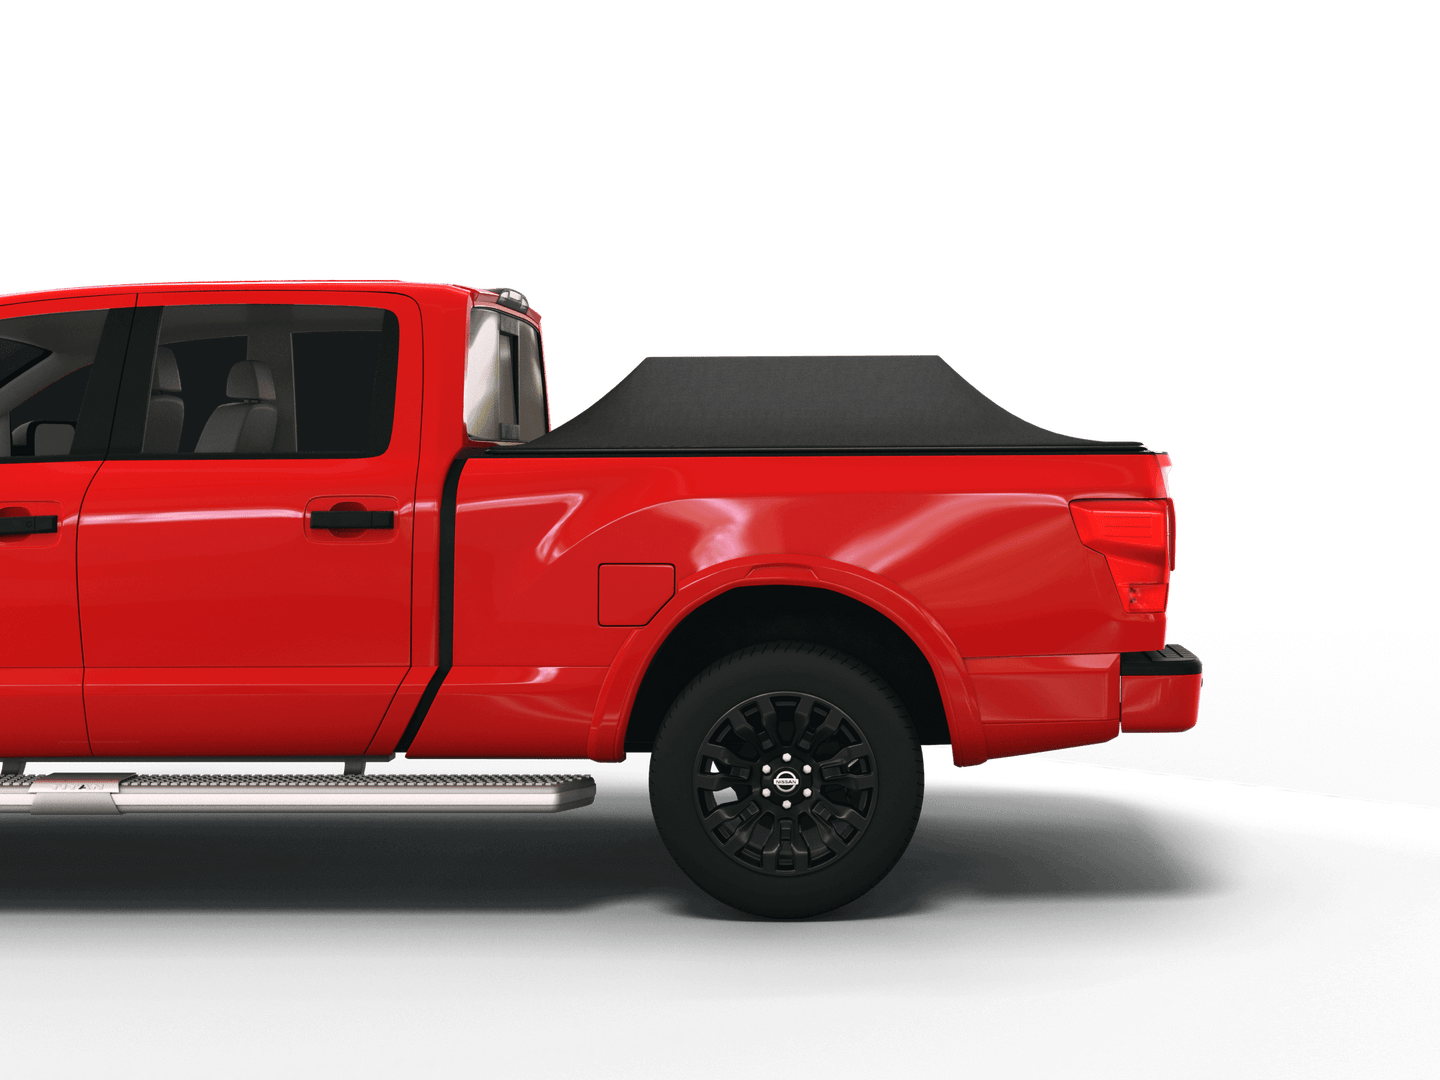 Red Nissan Titan with Sawtooth Stretch tonneau cover expanded over cargo load